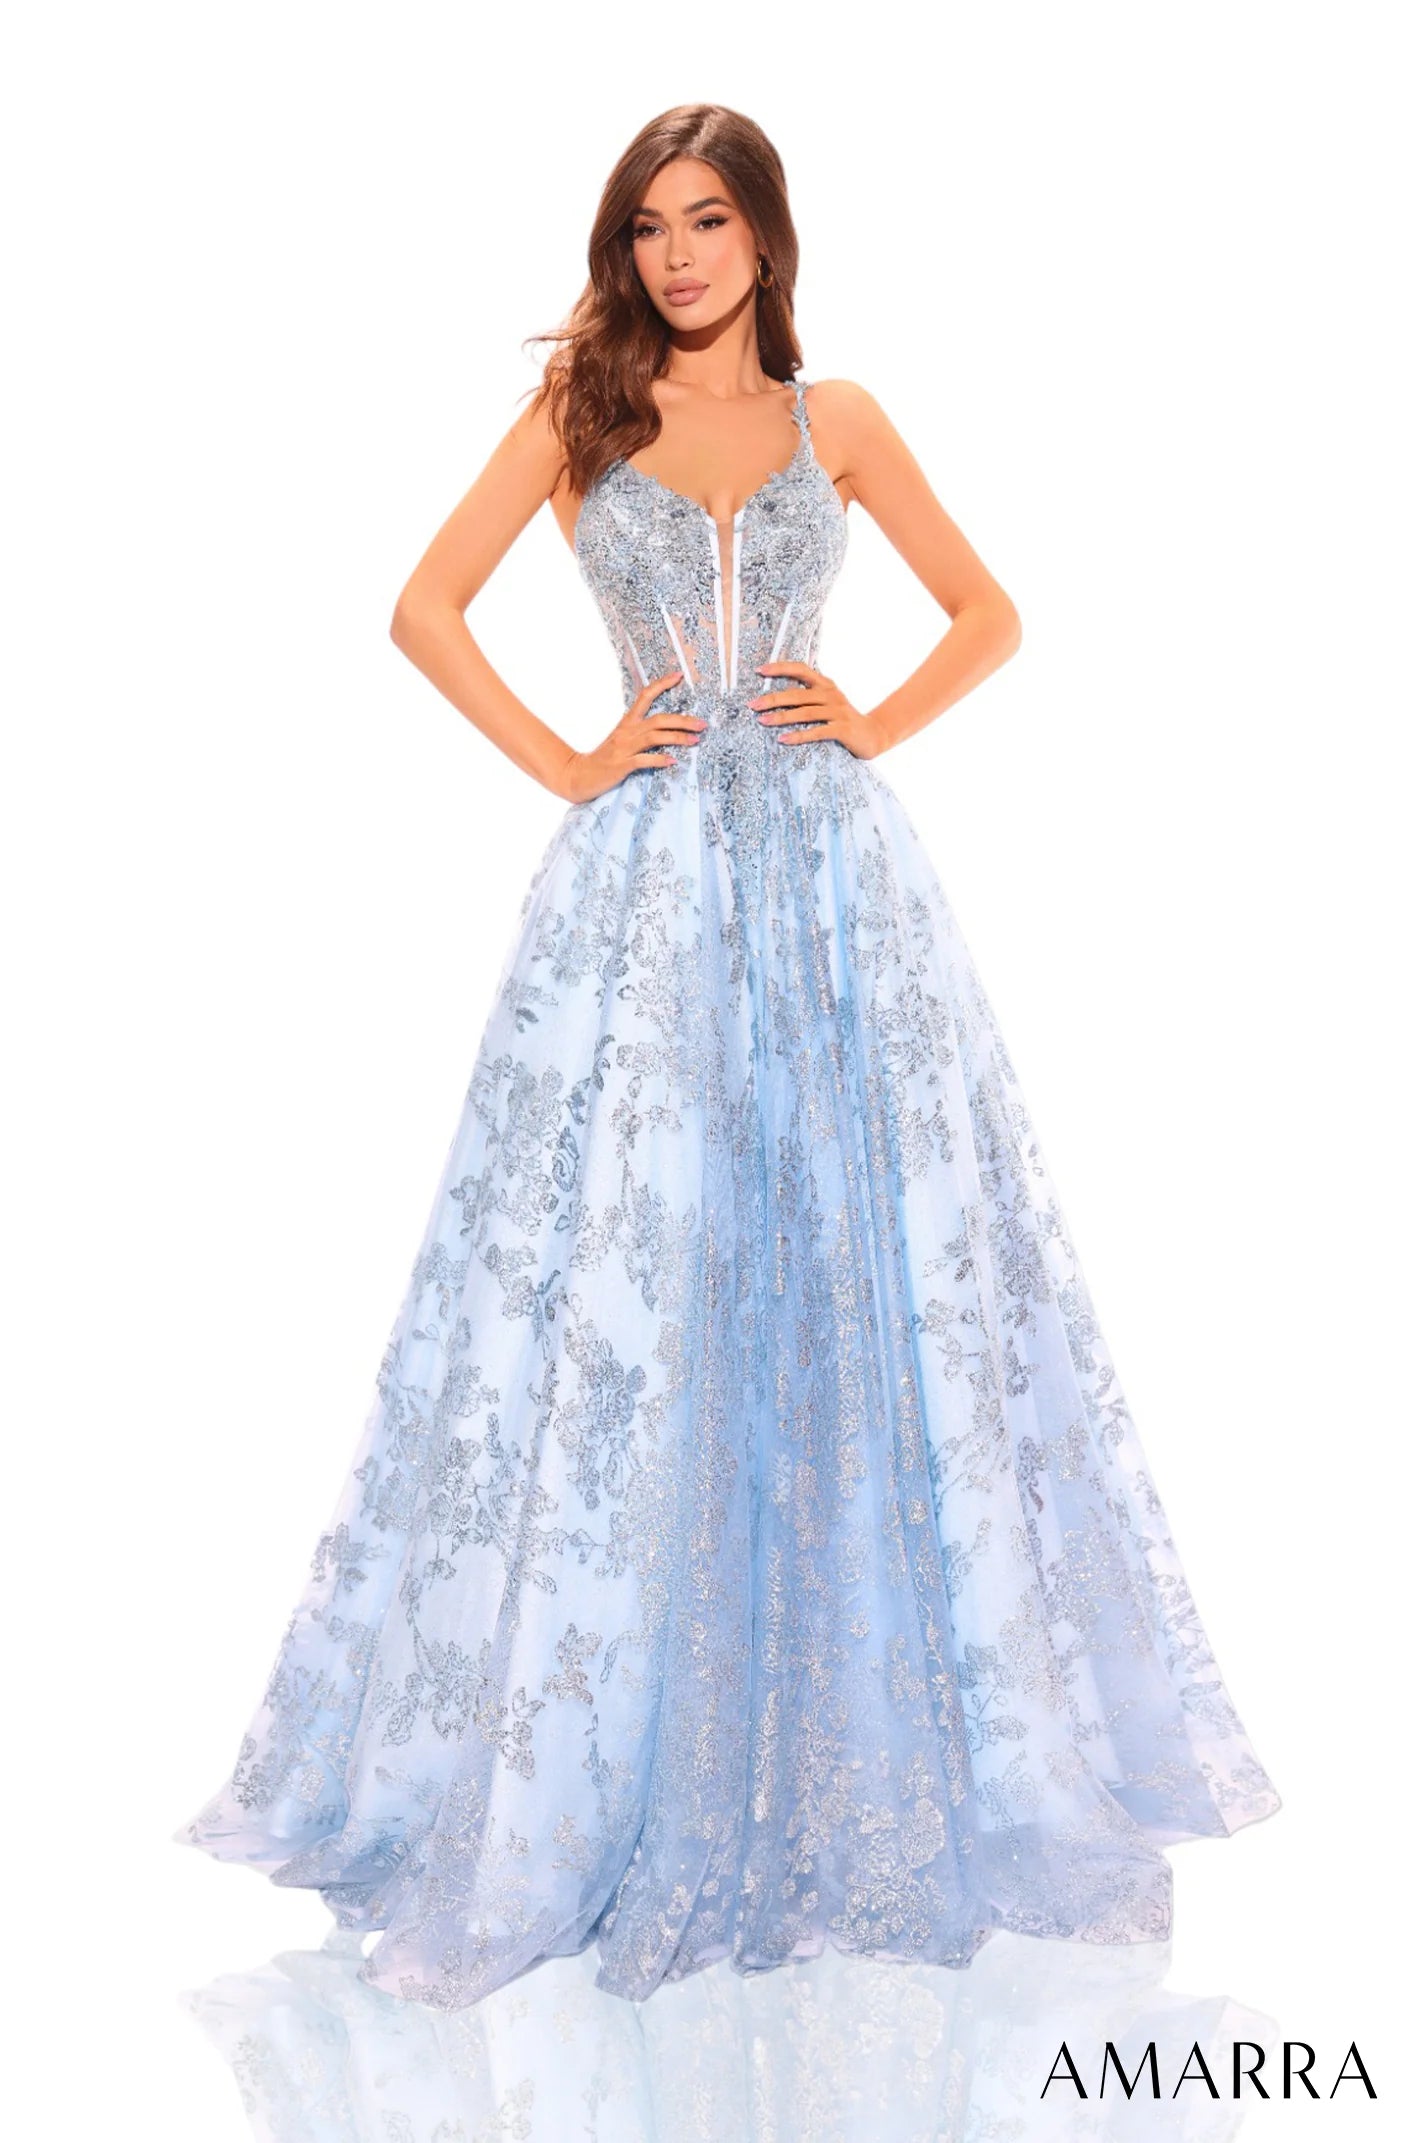 Amarra 88741 Long Prom Dress Corset Ball Gown 3-D Flowers Beading Stone Accents Glitter Tulle Formal Pageant Gown